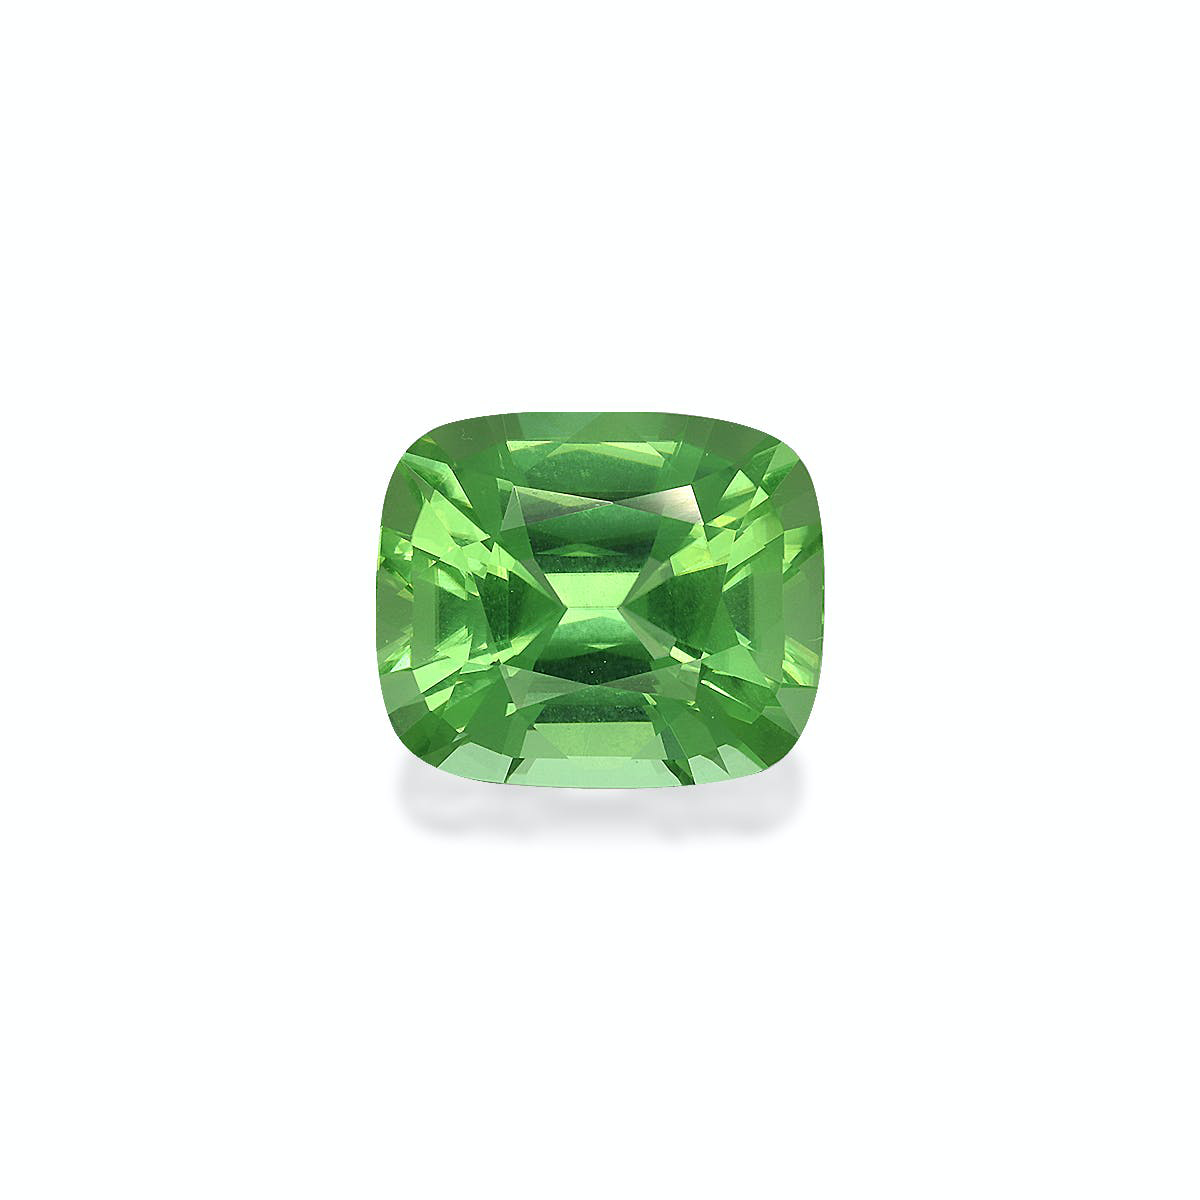 Picture of Green Peridot 8.94ct - 13x11mm (PD0221)